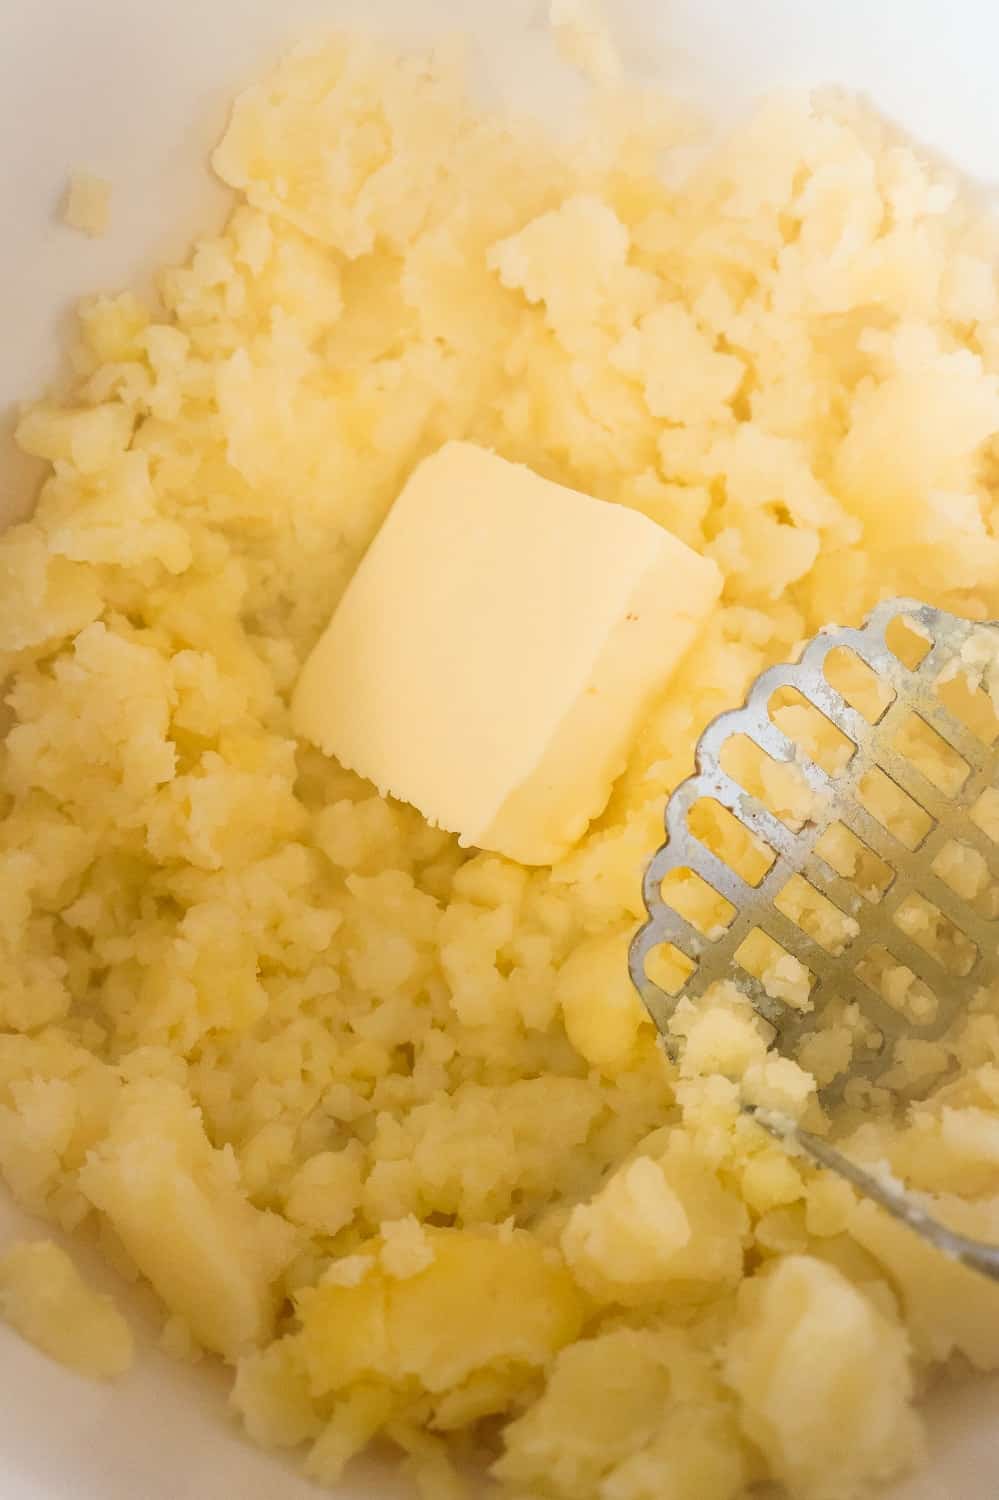 butter and milk added to mashed potatoes in a mixing bowl